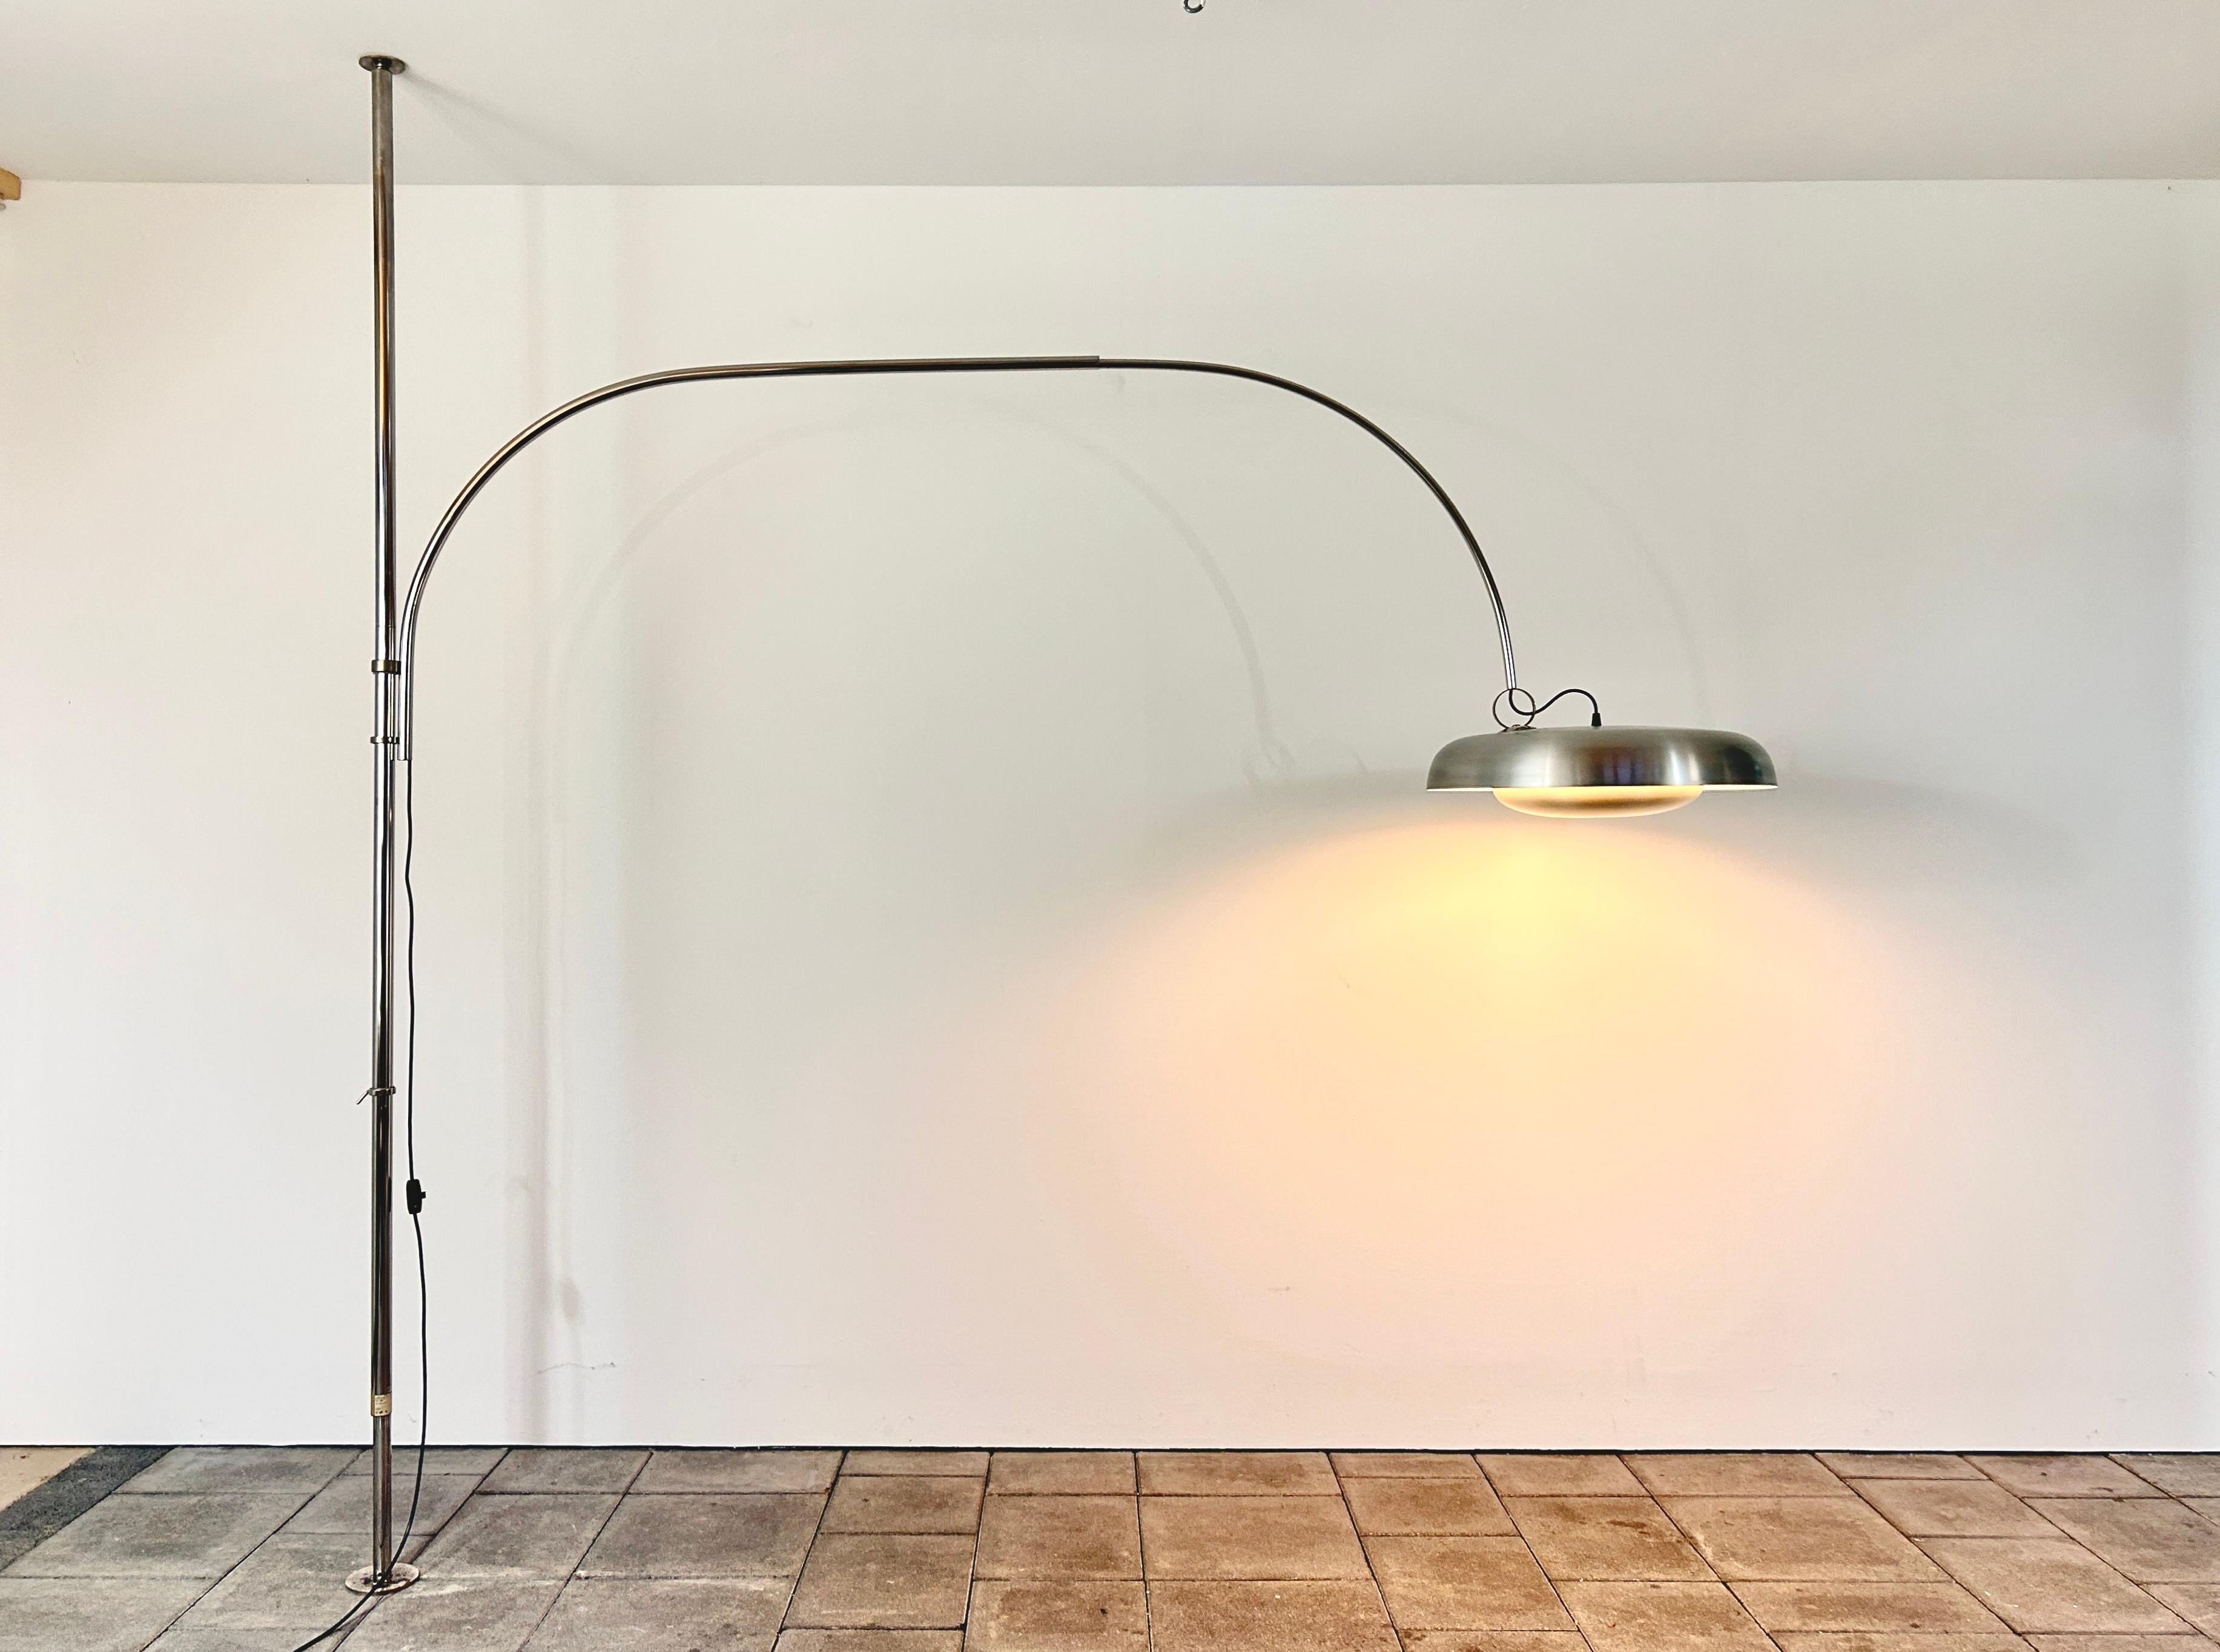 PR Arc lamp designed by Pirro Cuniberti in 1970.

manufactured by Sirrah Imola, Italy in the 1970ies. With makers bedge on extension pole. This collectible lamp is no longer in production.

Pirro Cuniberti was an Italian artist who also worked as a